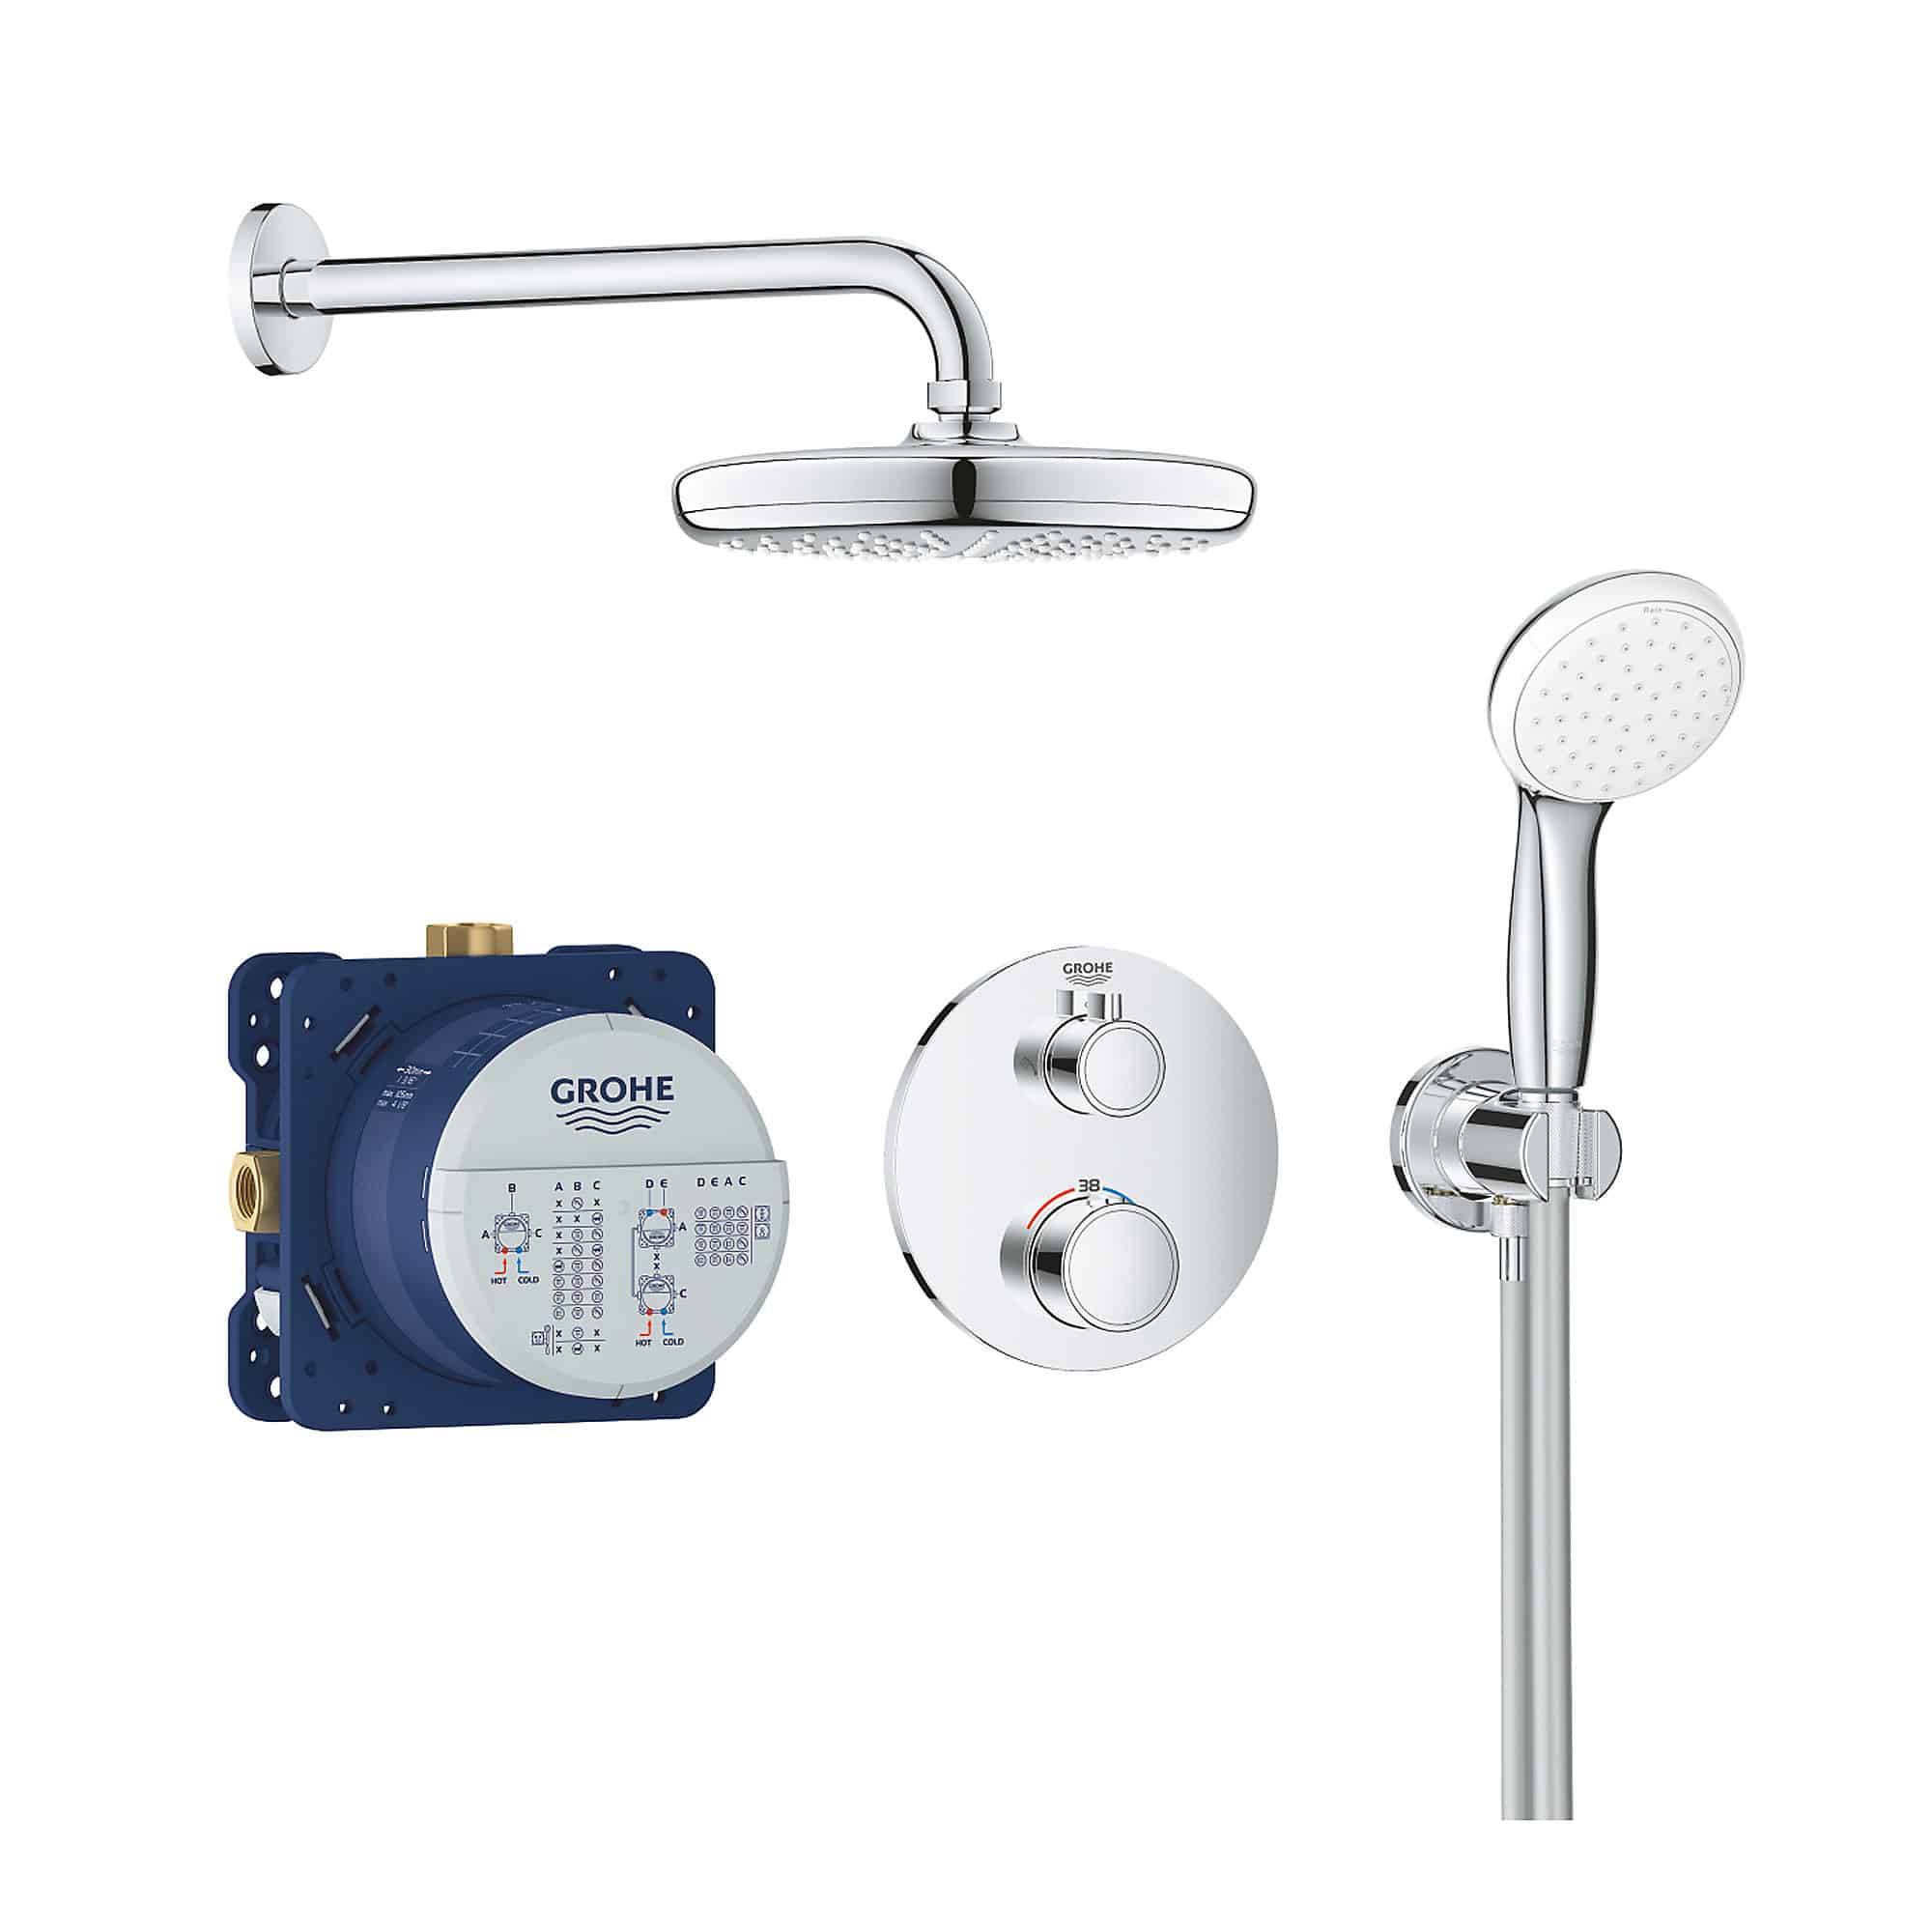 GROHE GROHTHERM PERFECT SHOWER SET WITH TEMPESTA 210-6021